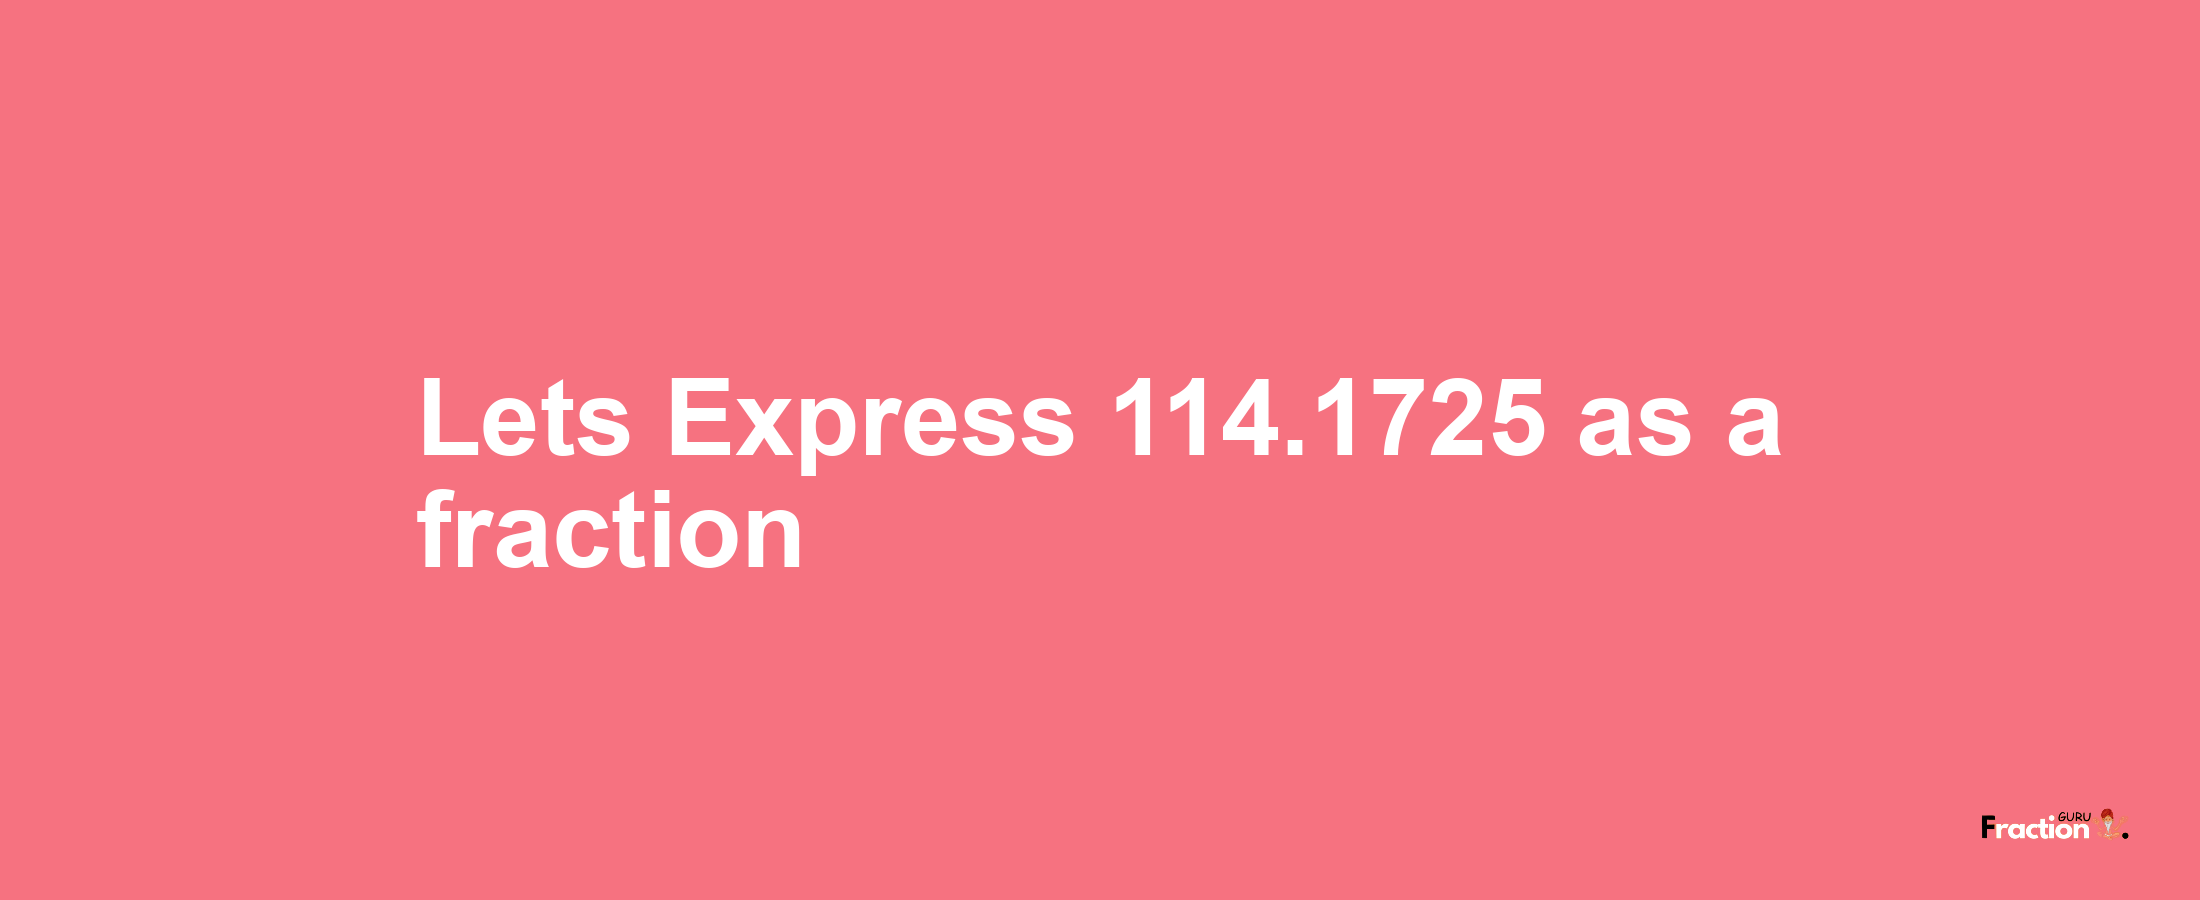 Lets Express 114.1725 as afraction